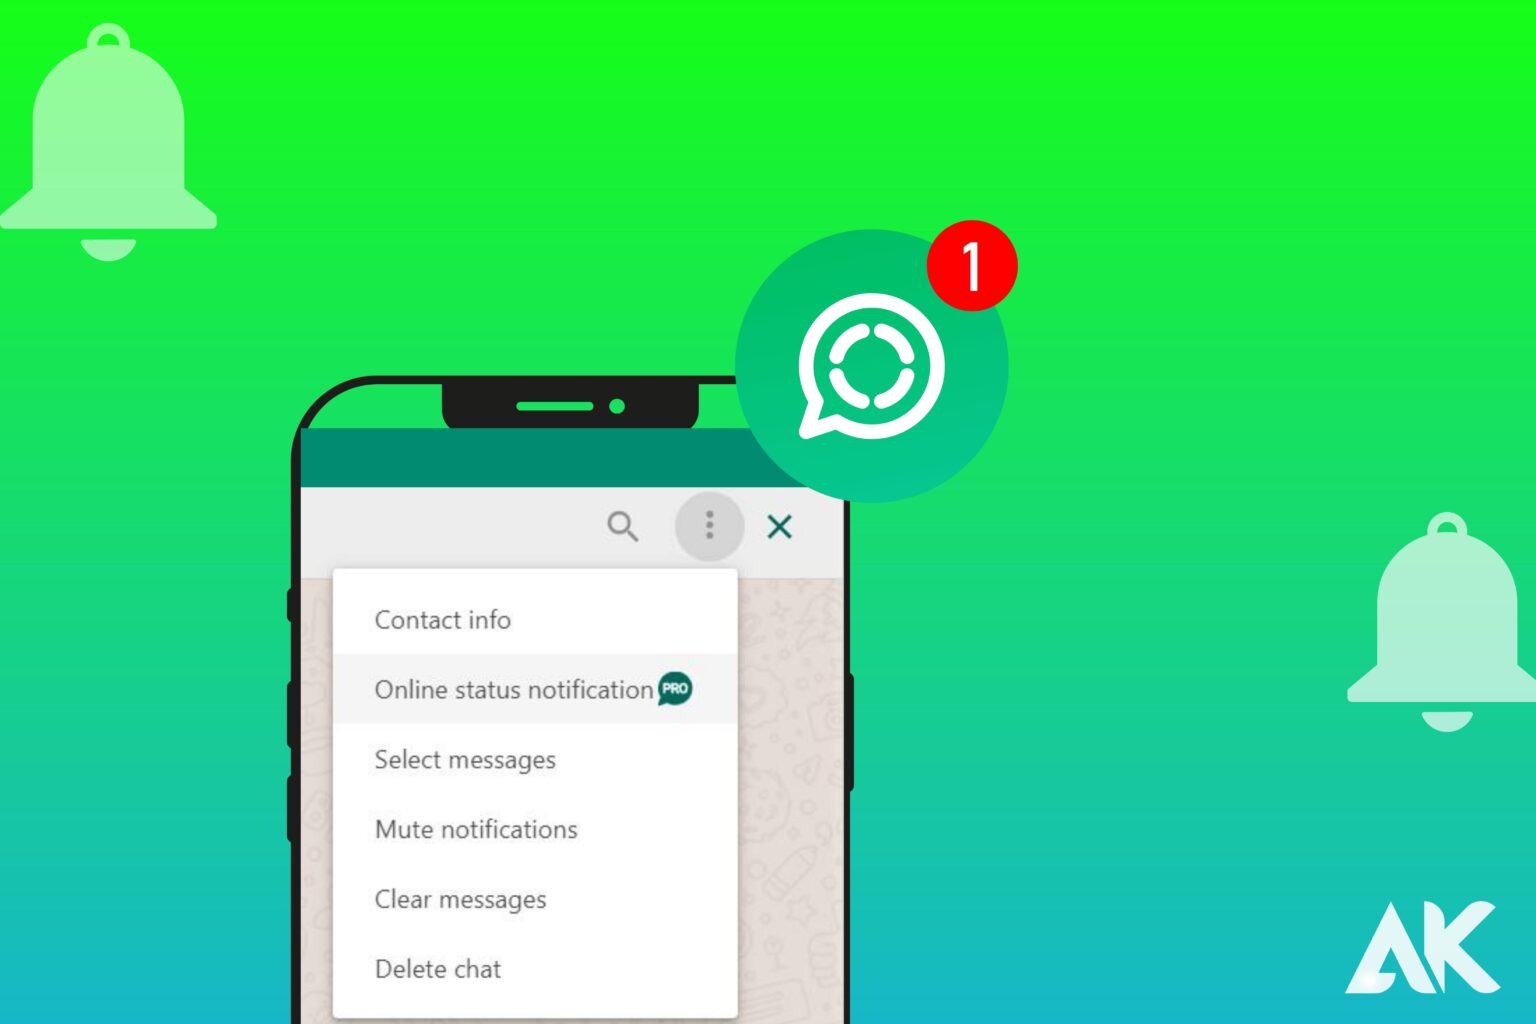 How to Get Instant WhatsApp Status Notifications - Don't Miss 5 tips